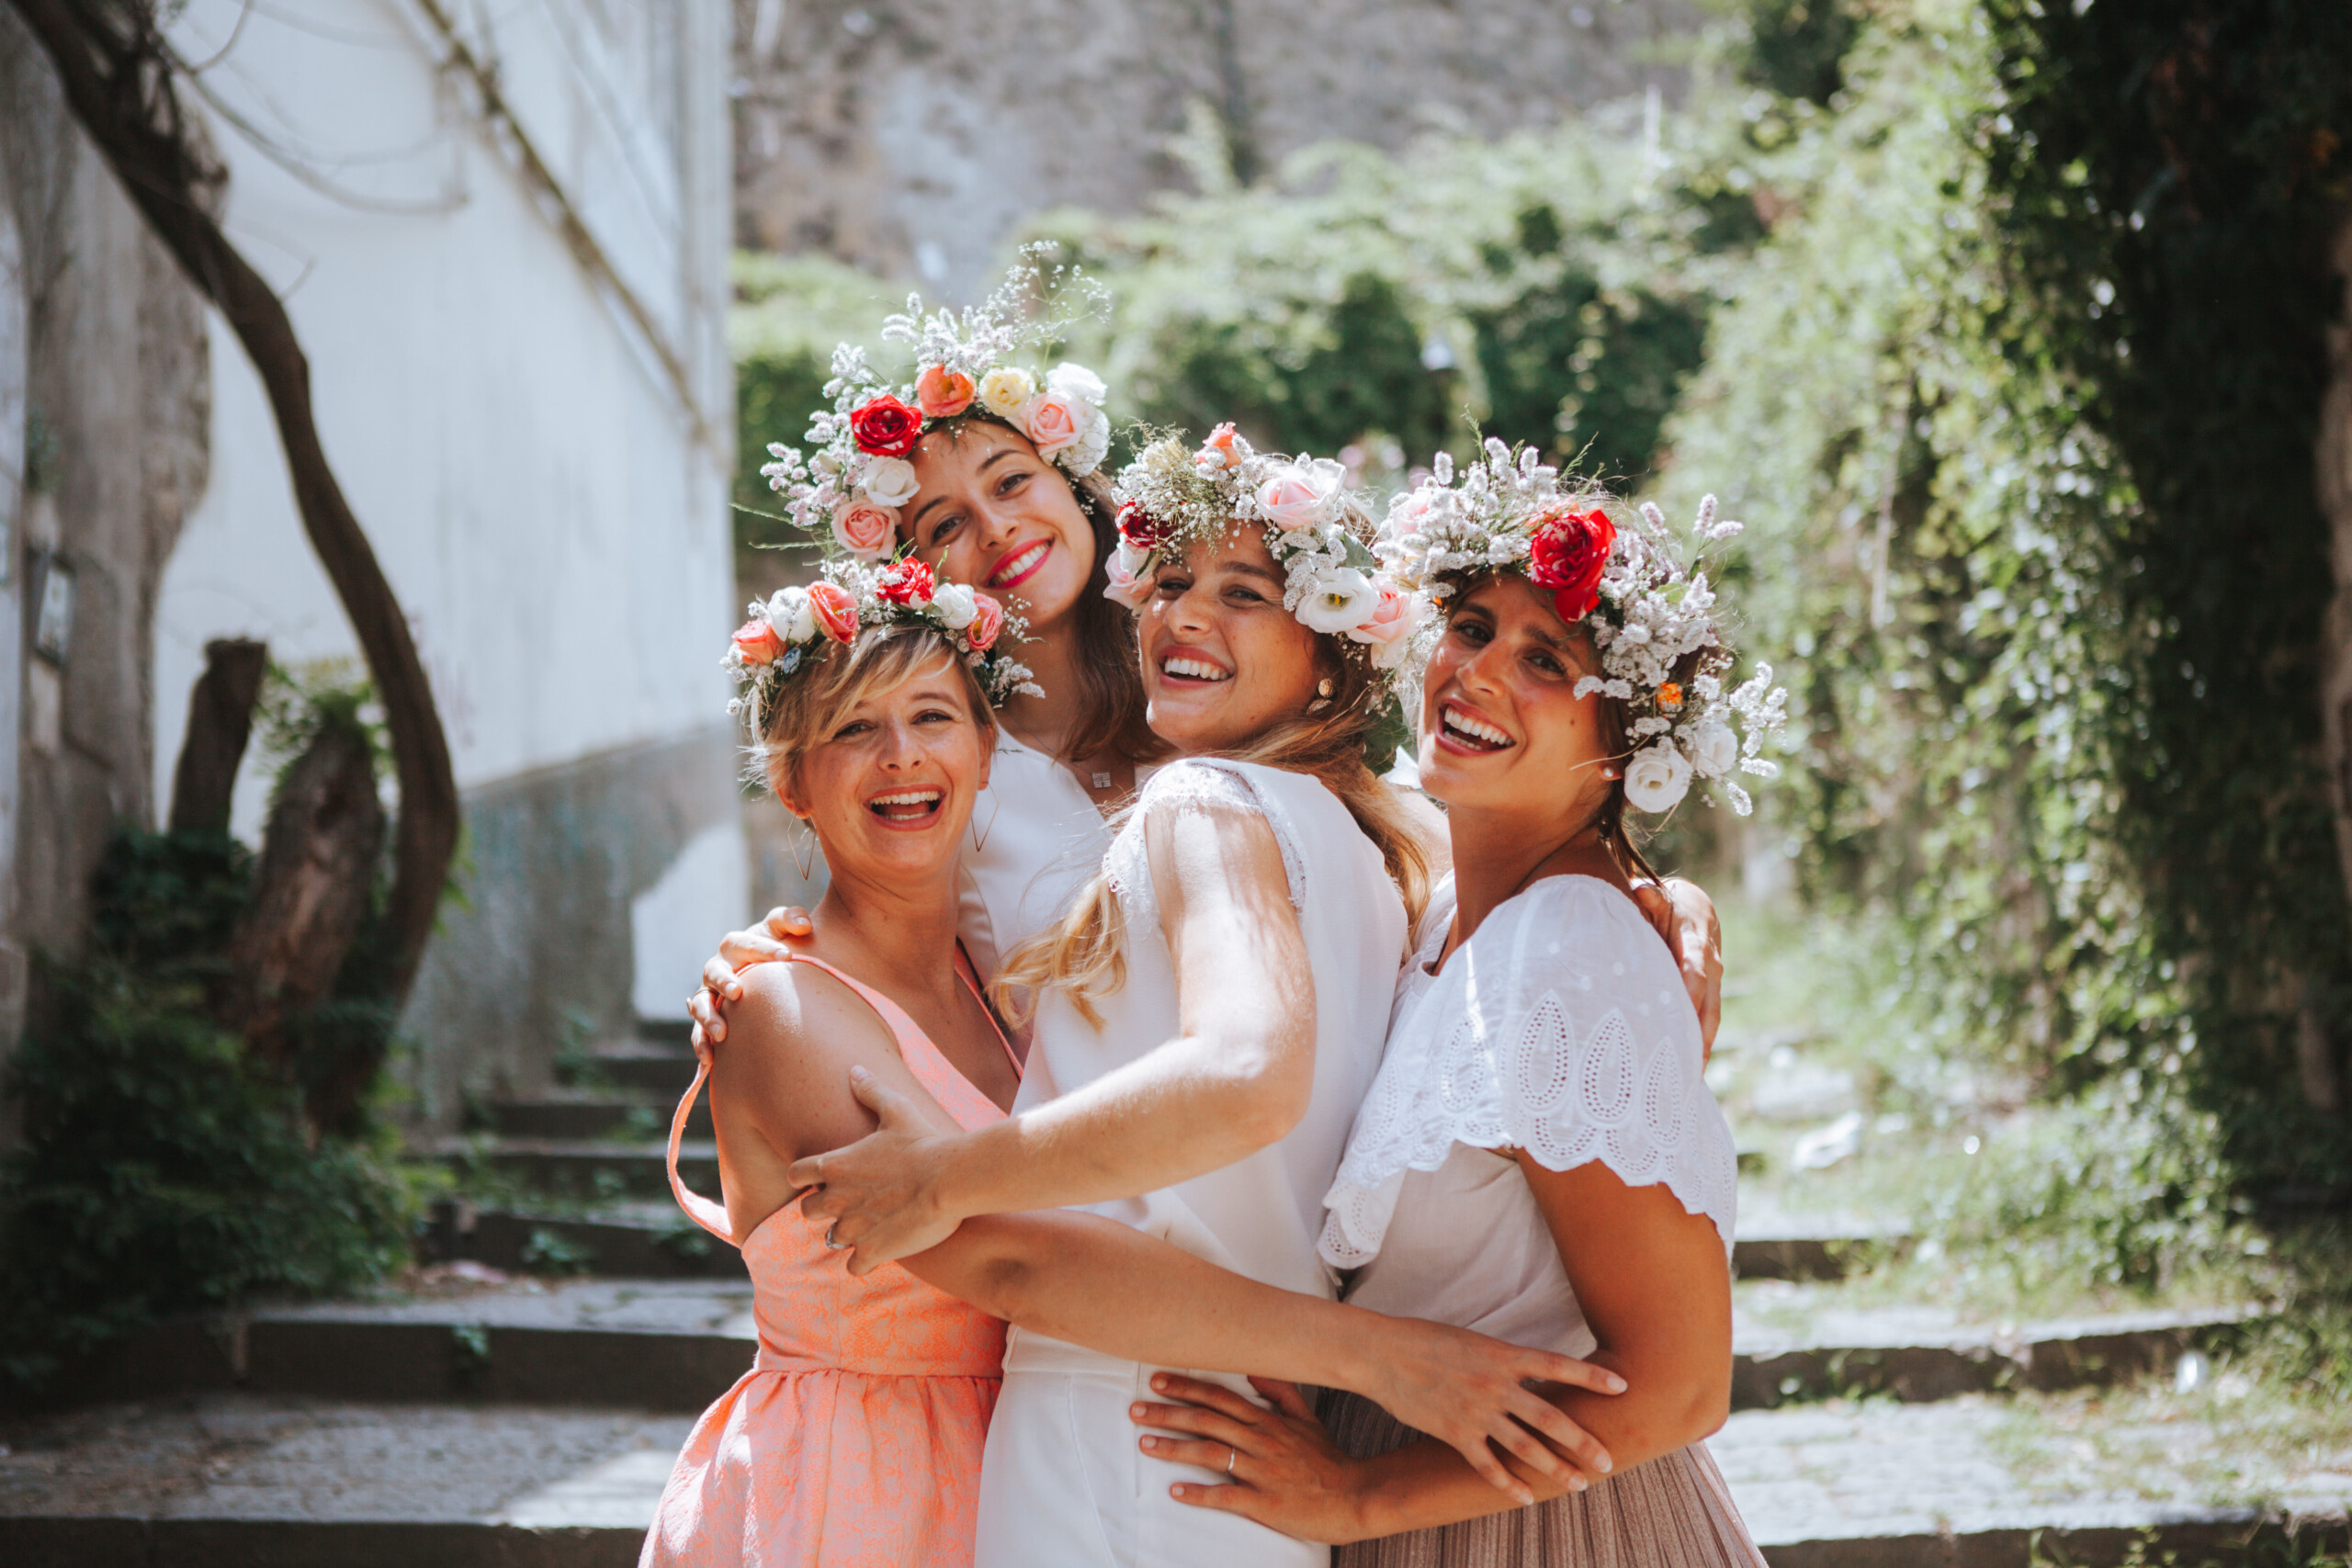 Bachelorette photoshoot by Serena, Localgrapher in Naples